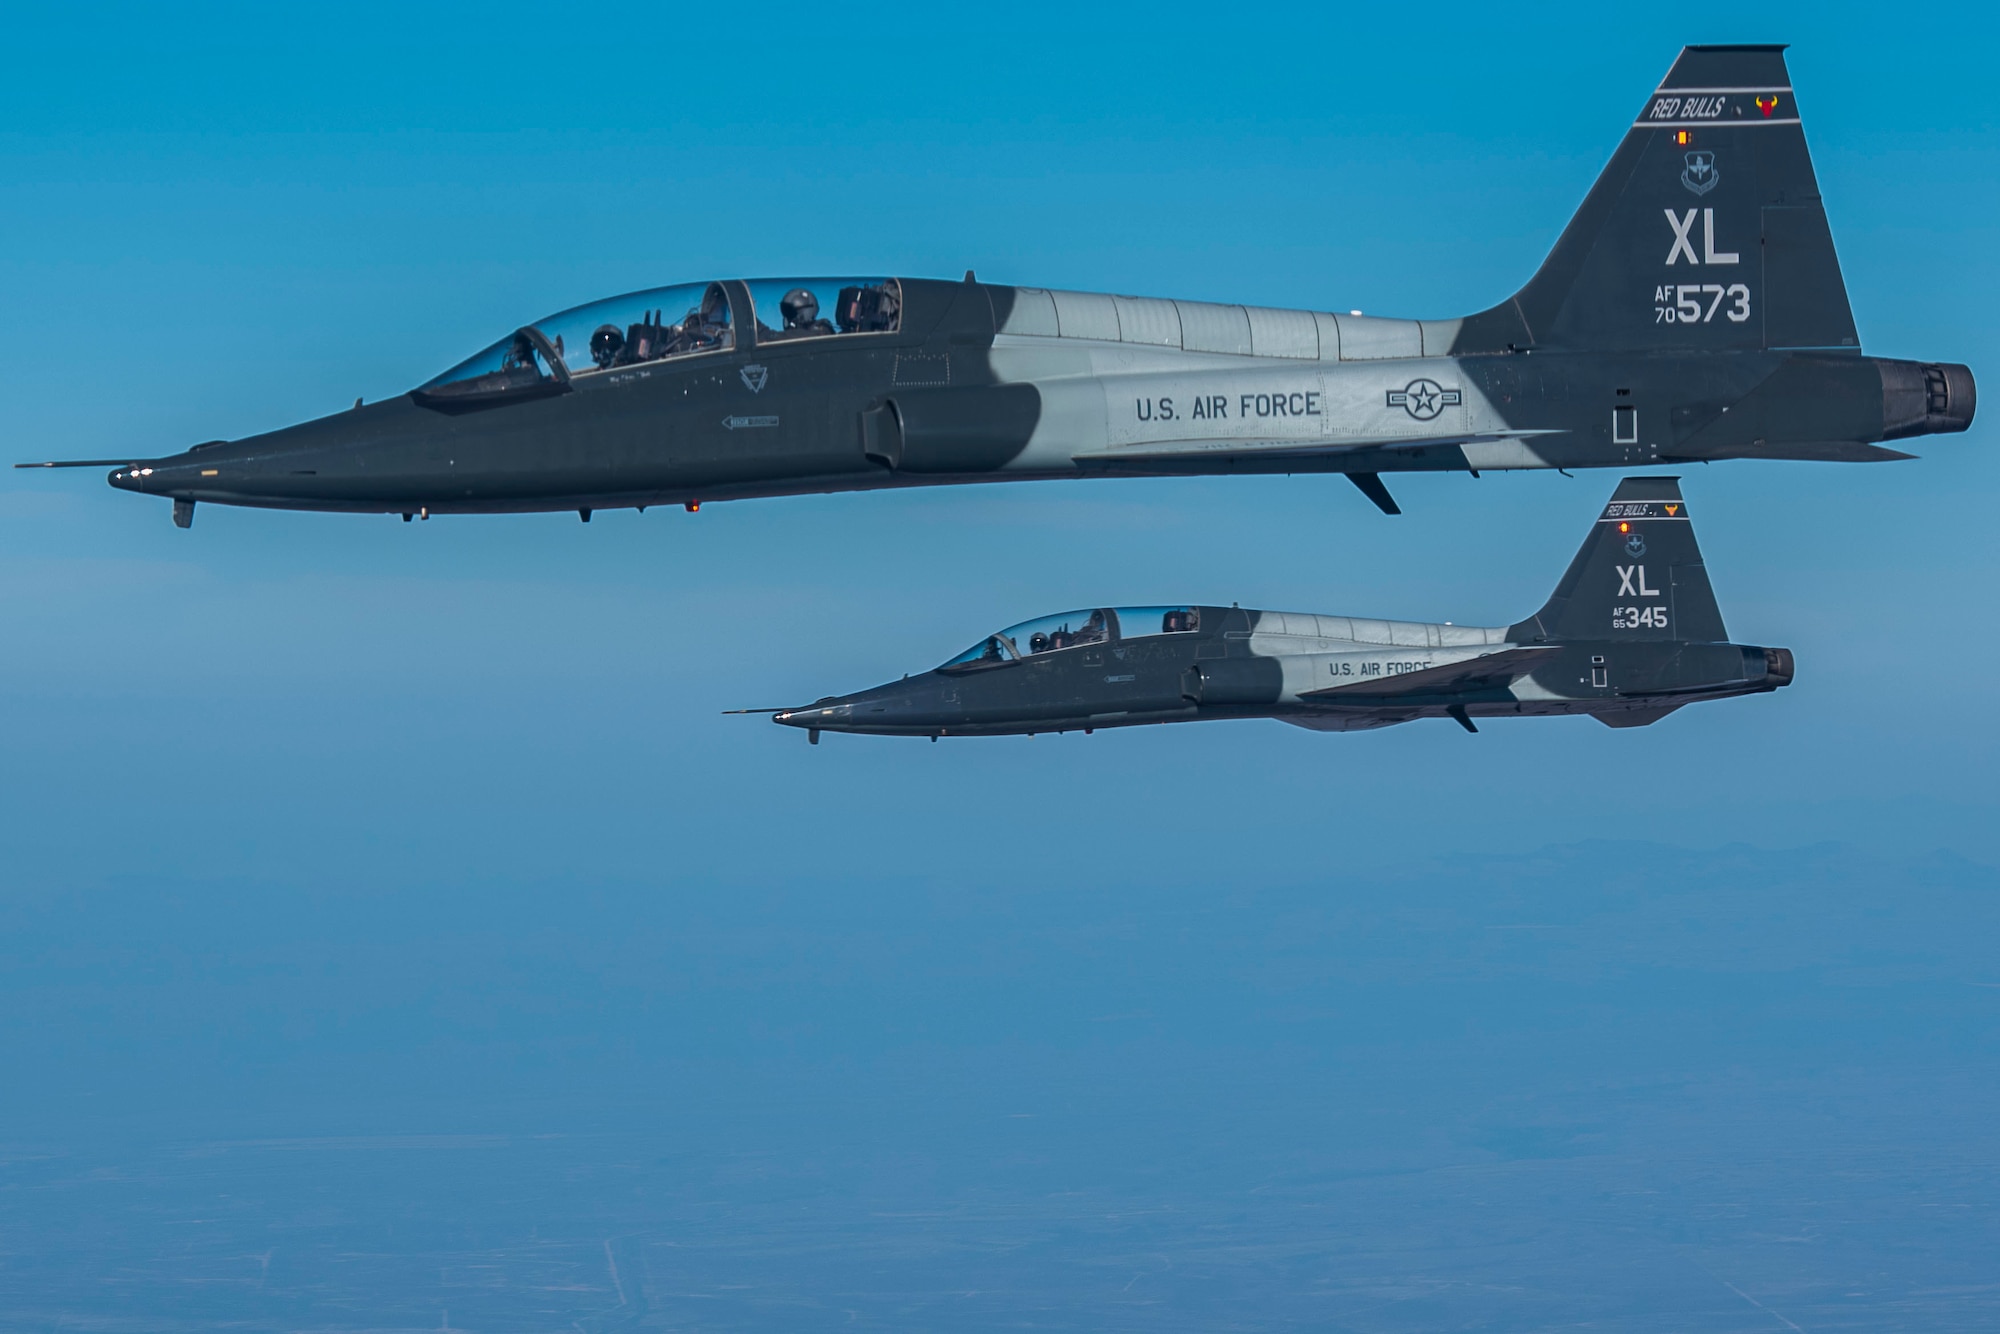 A standard training T-38 flight on Apr. 07, 2021 at Laughlin Air Force Base Texas. The T-38 is the standard aircraft for training pilots who are tracking in the fighter aircraft. (U.S. Air Force photo by Airman 1st Class David Phaff)